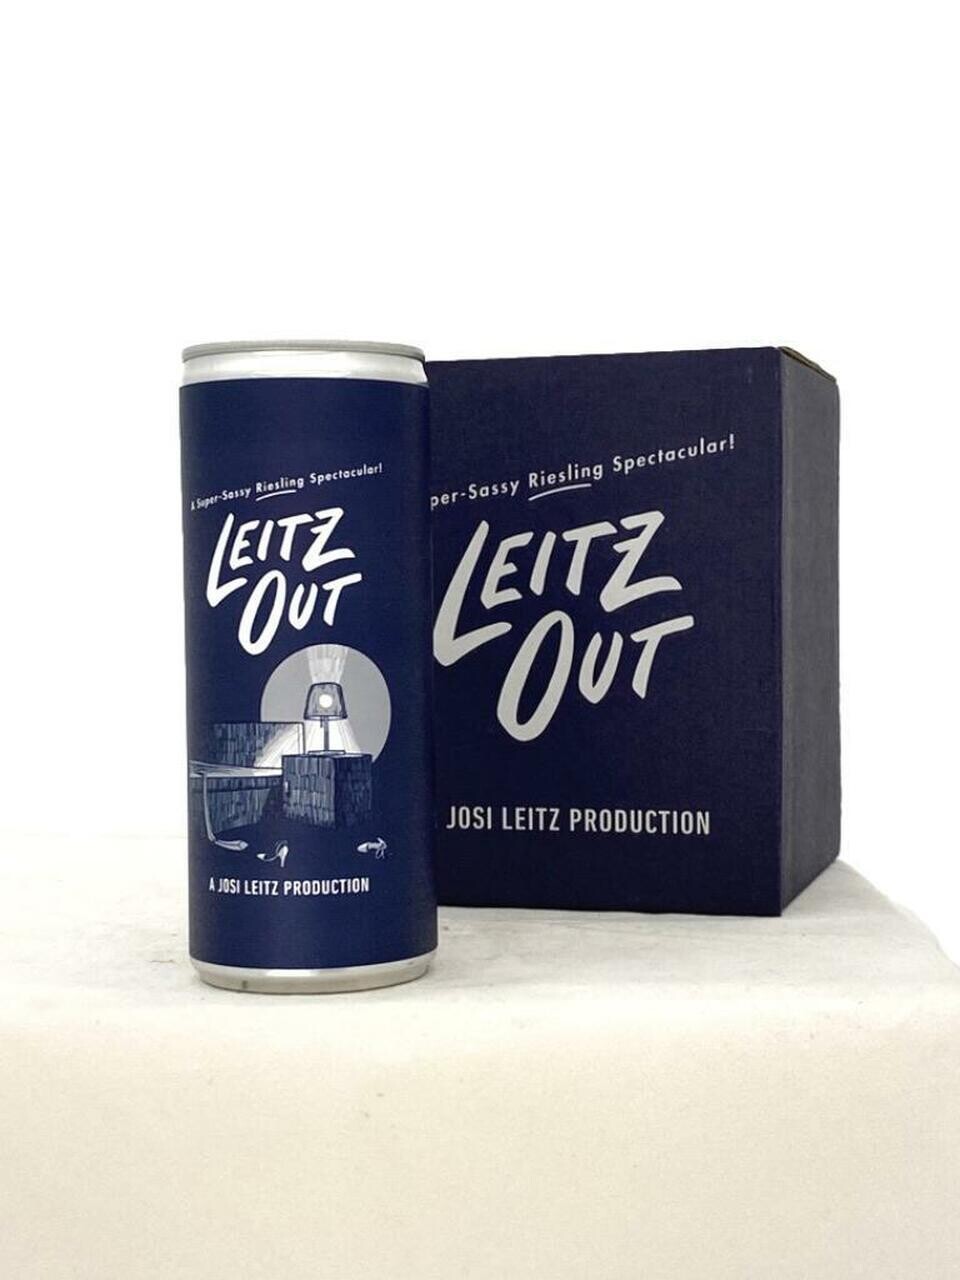 Leitz 2020 Leitz Out Riesling